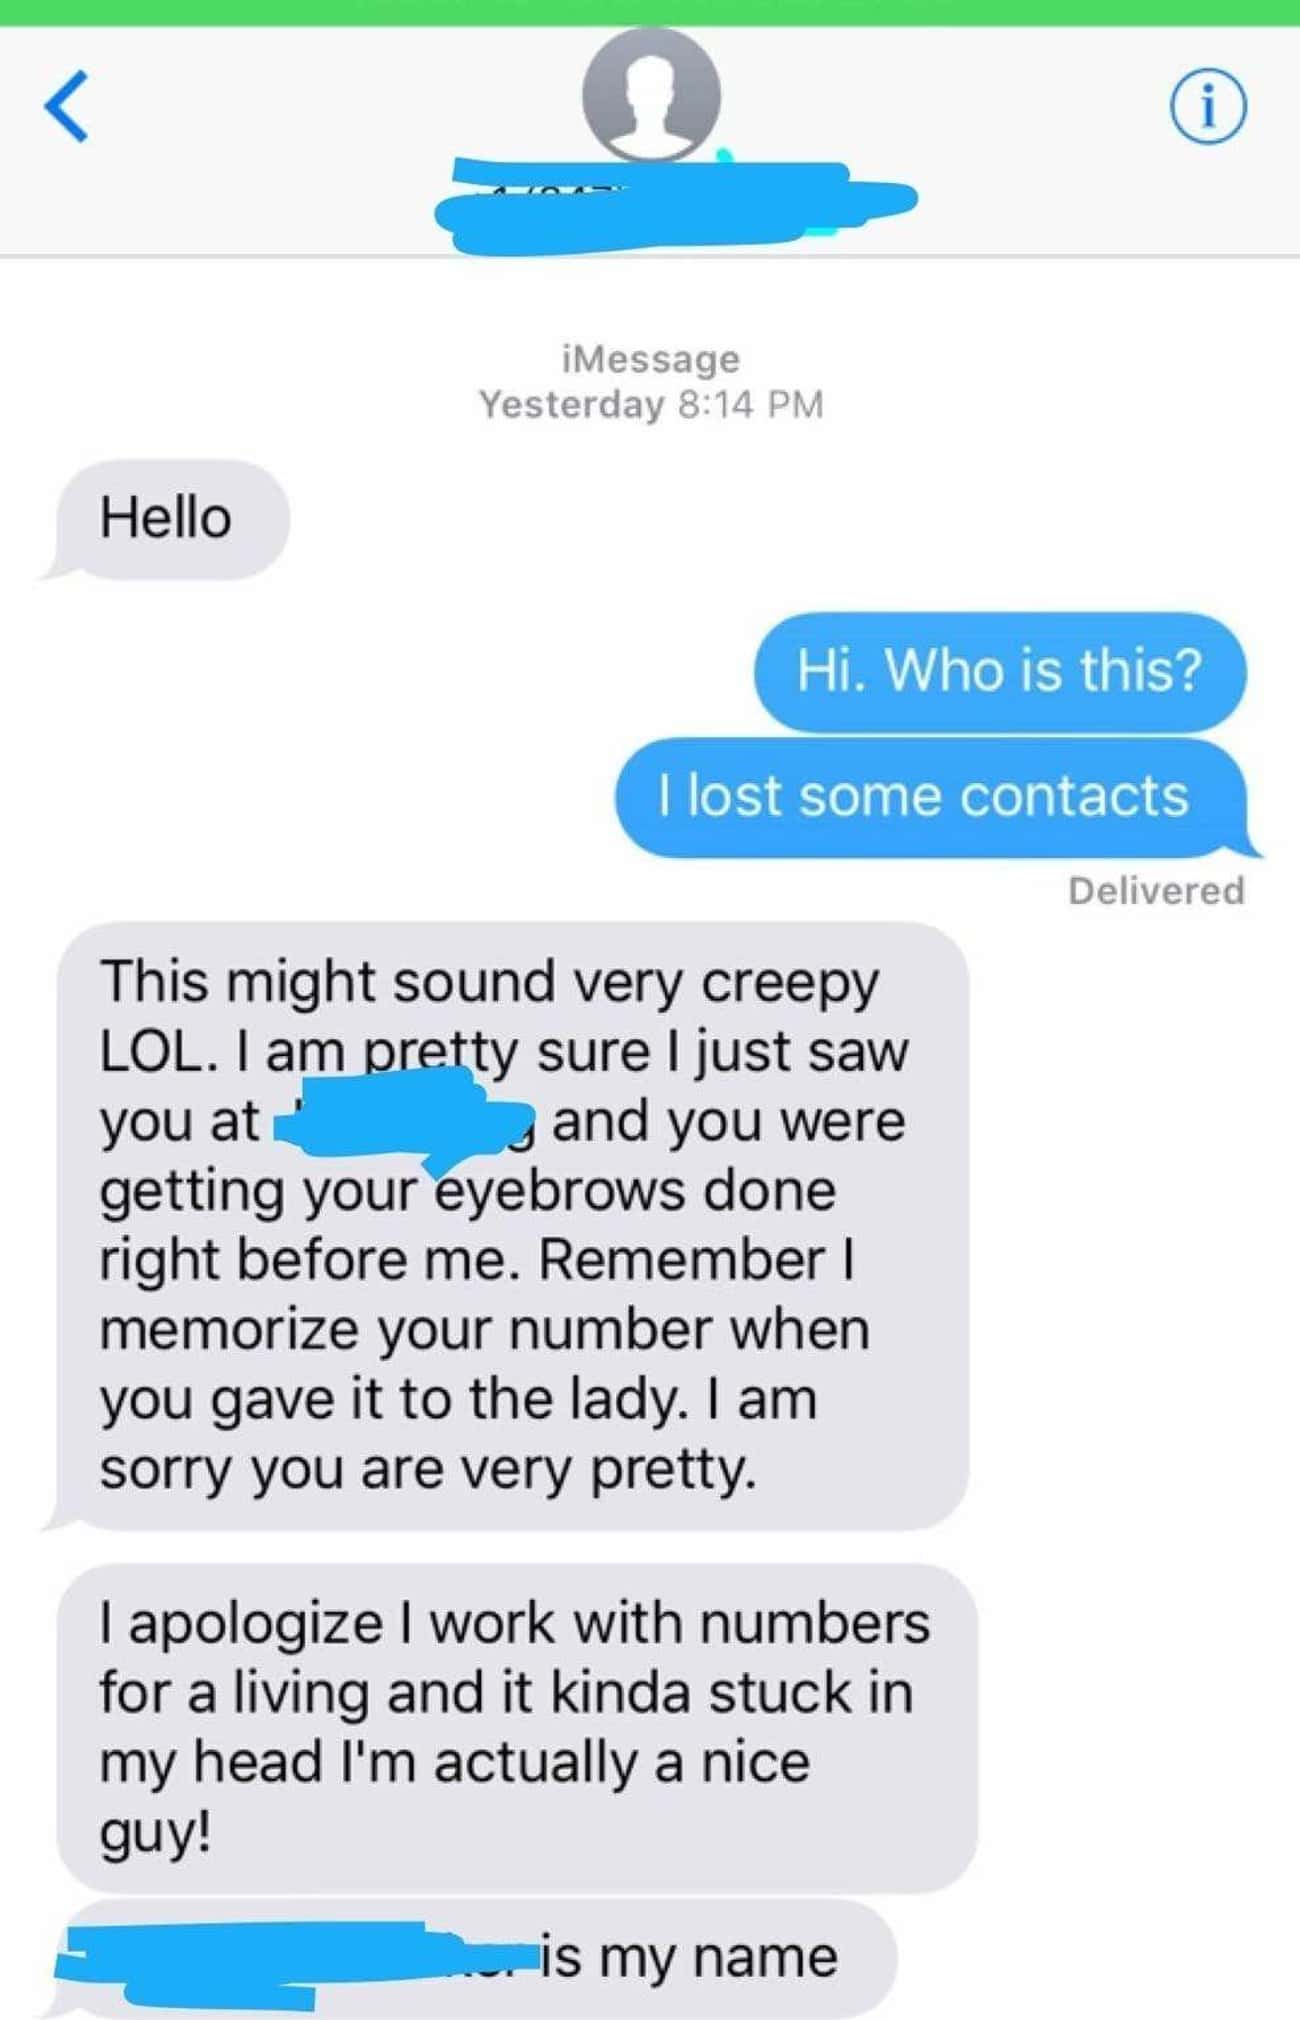 cringe posts - web page - . i iMessage Yesterday Hello Hi. Who is this? I lost some contacts Delivered you at This might sound very creepy Lol. I am pretty sure I just saw and you were getting your eyebrows done right before me. Remember | memorize your n